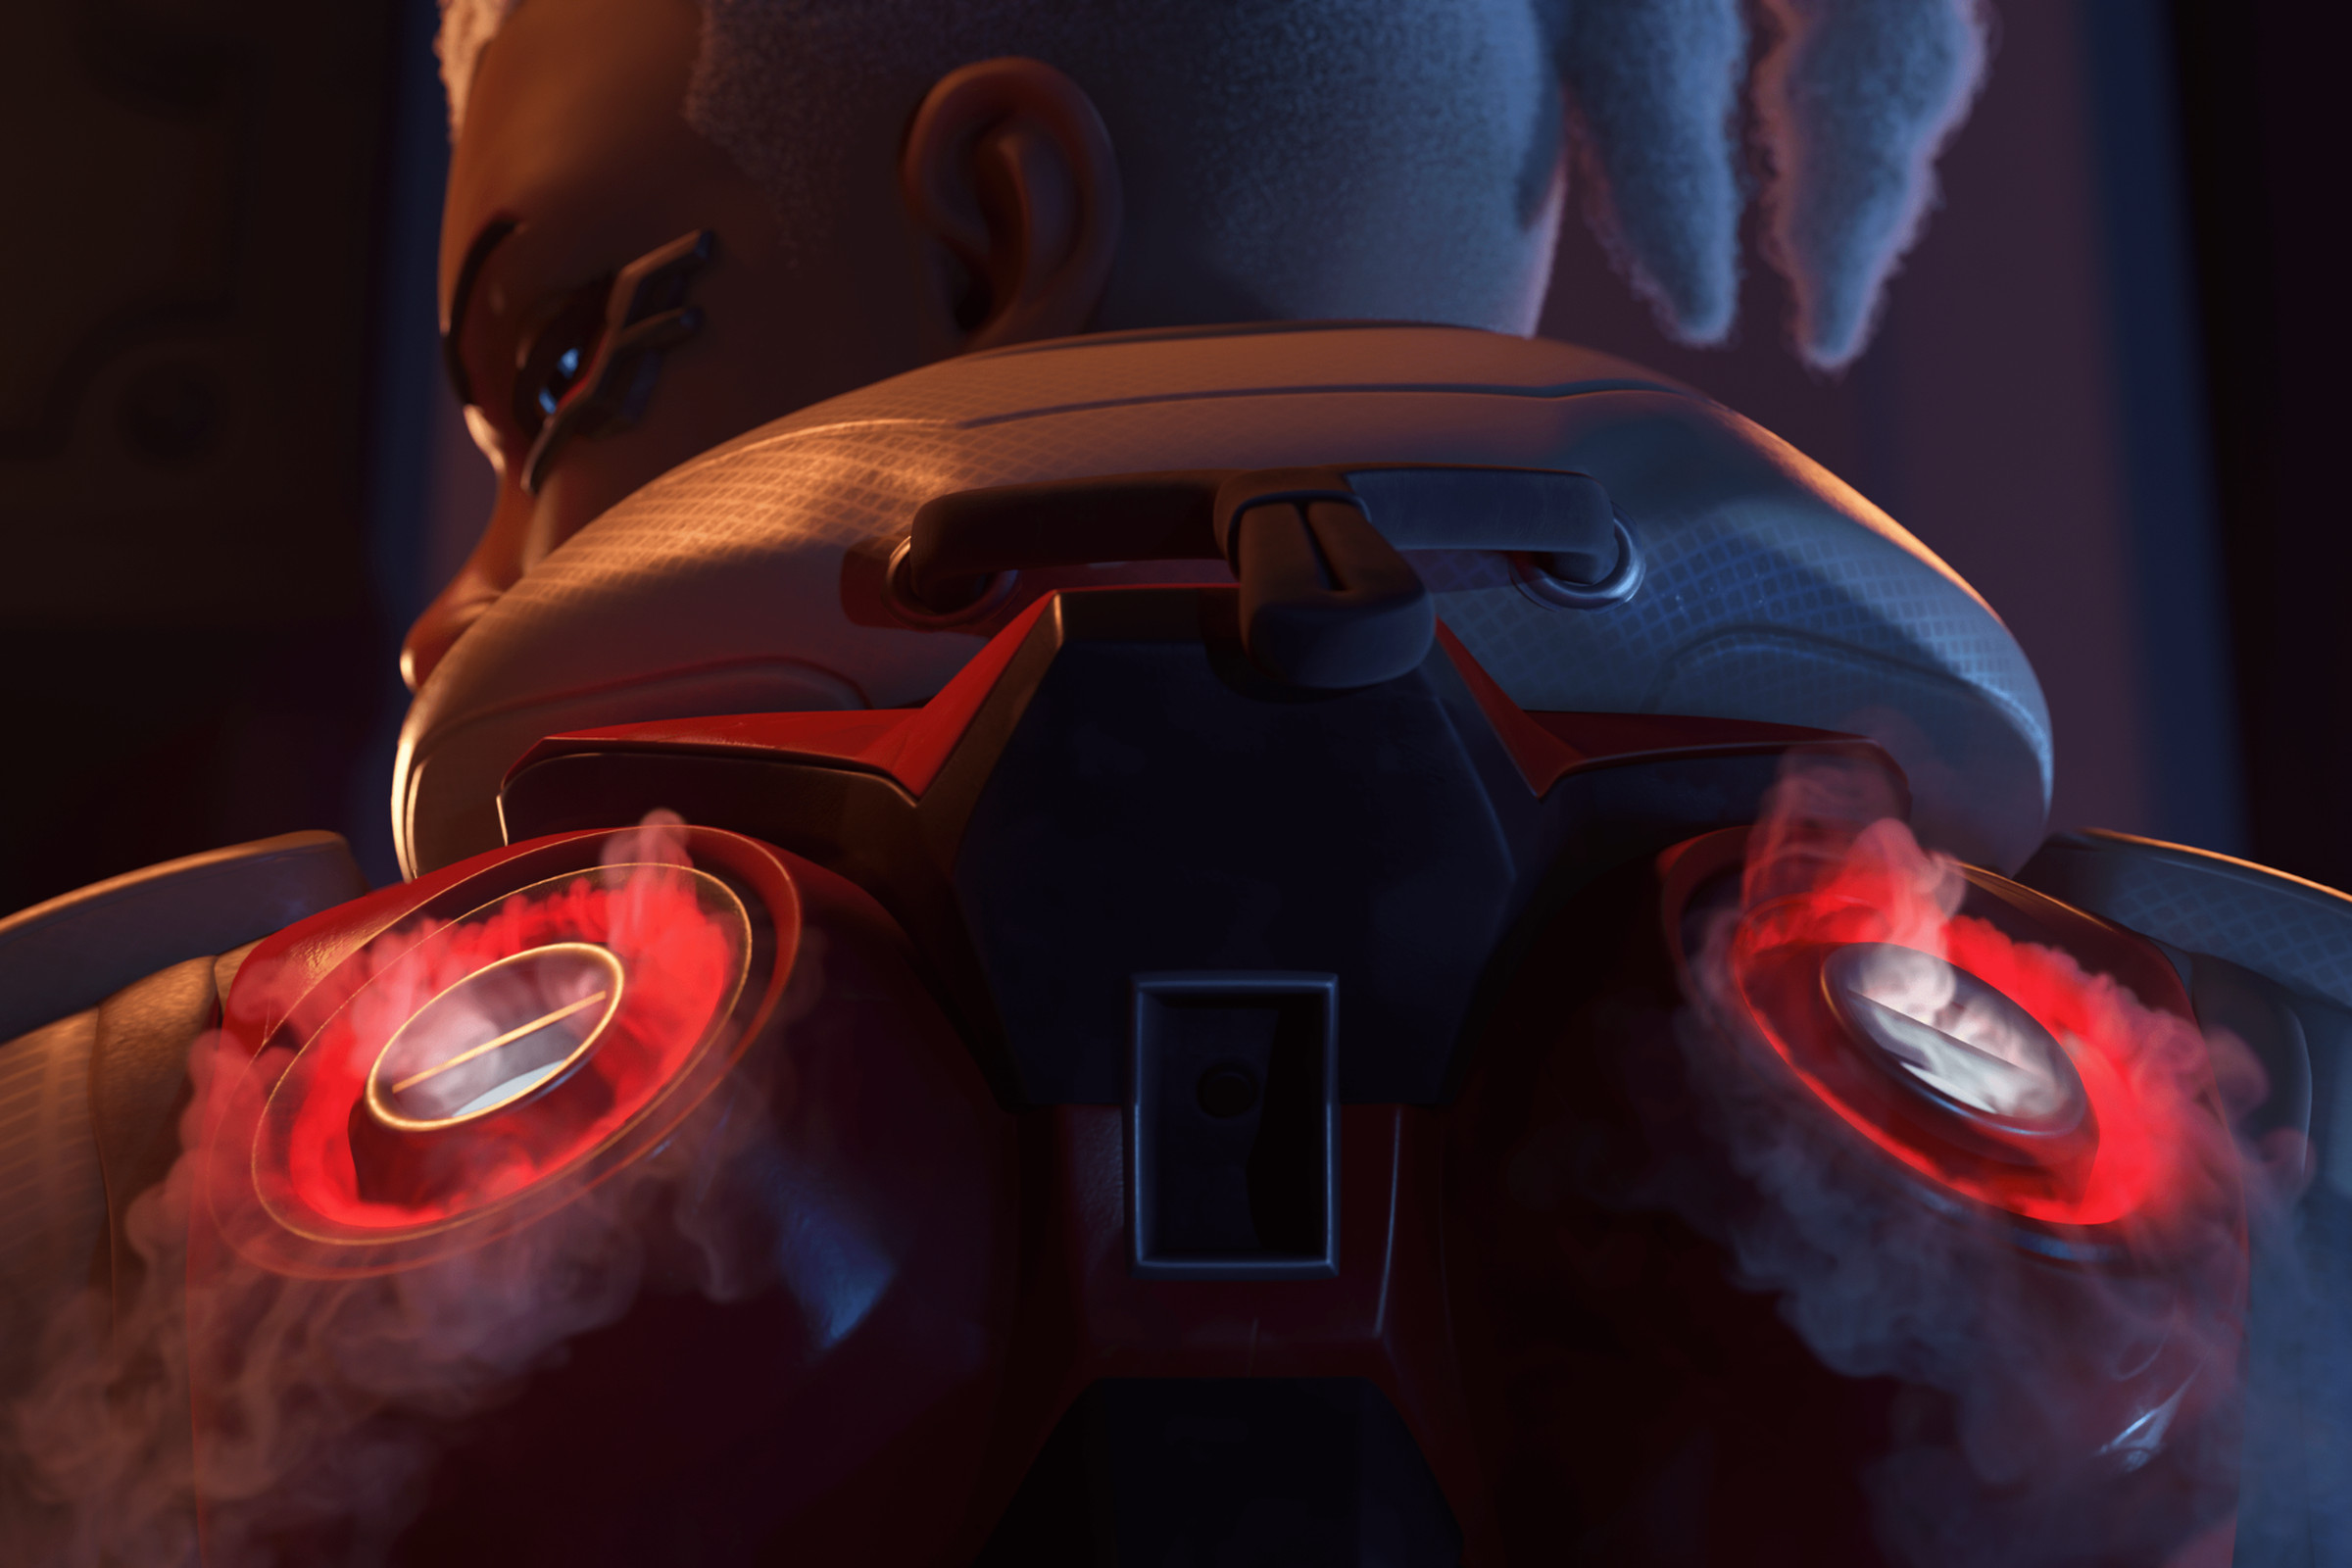 Screenshot from Overwatch 2 featuring the hero Sojourn, a female African Canadian hero with a fully cybernetic body